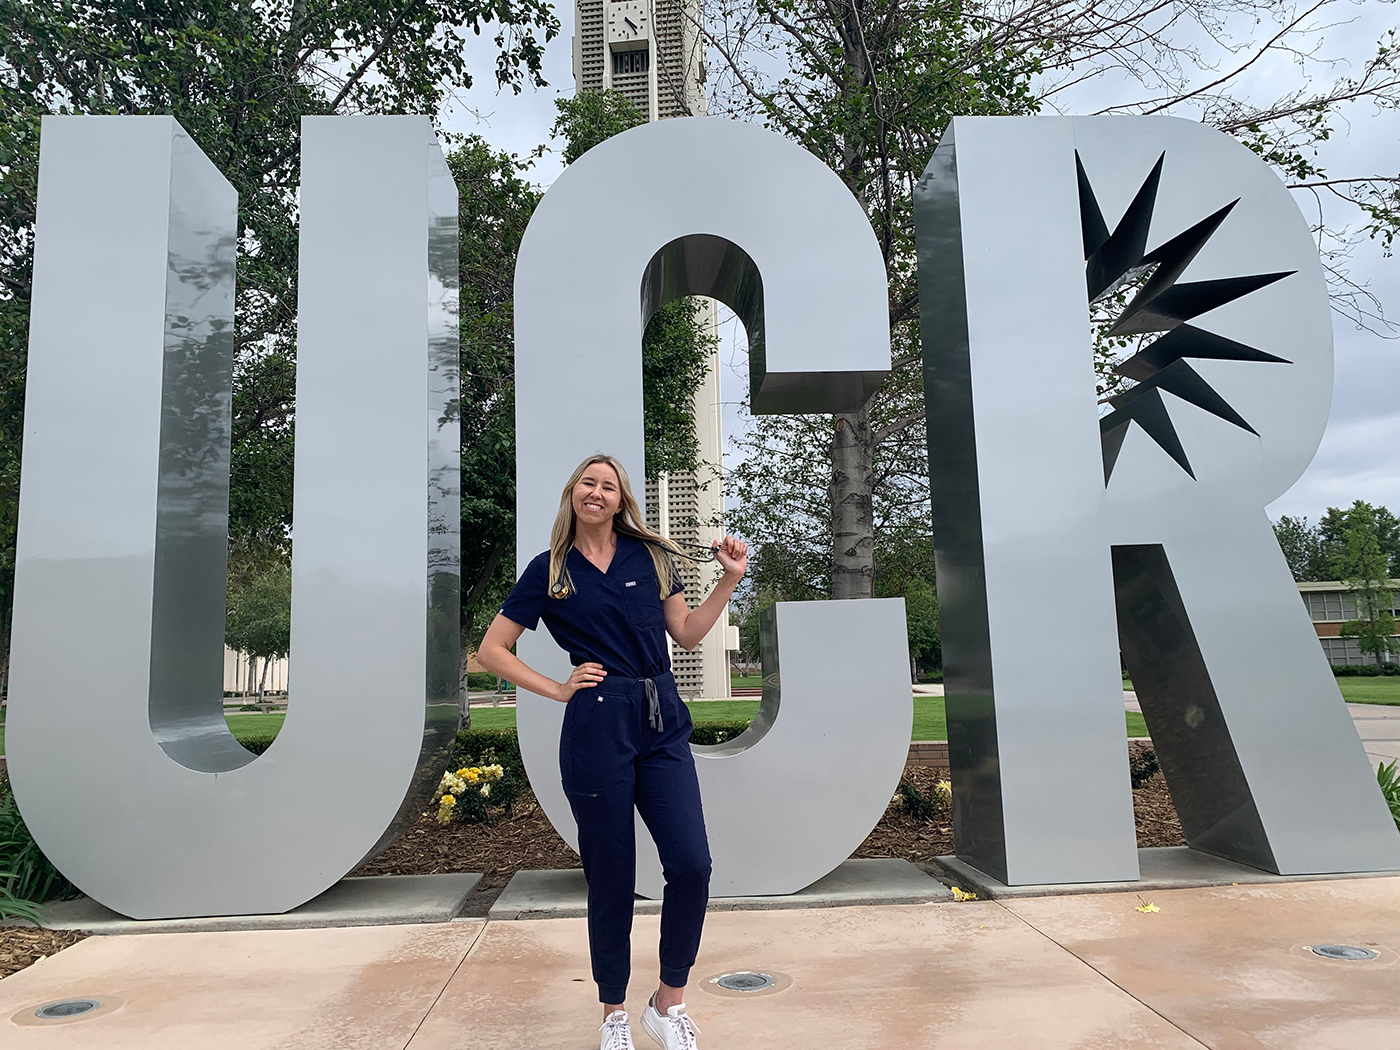 Skylar Rains in front of the UCR sign